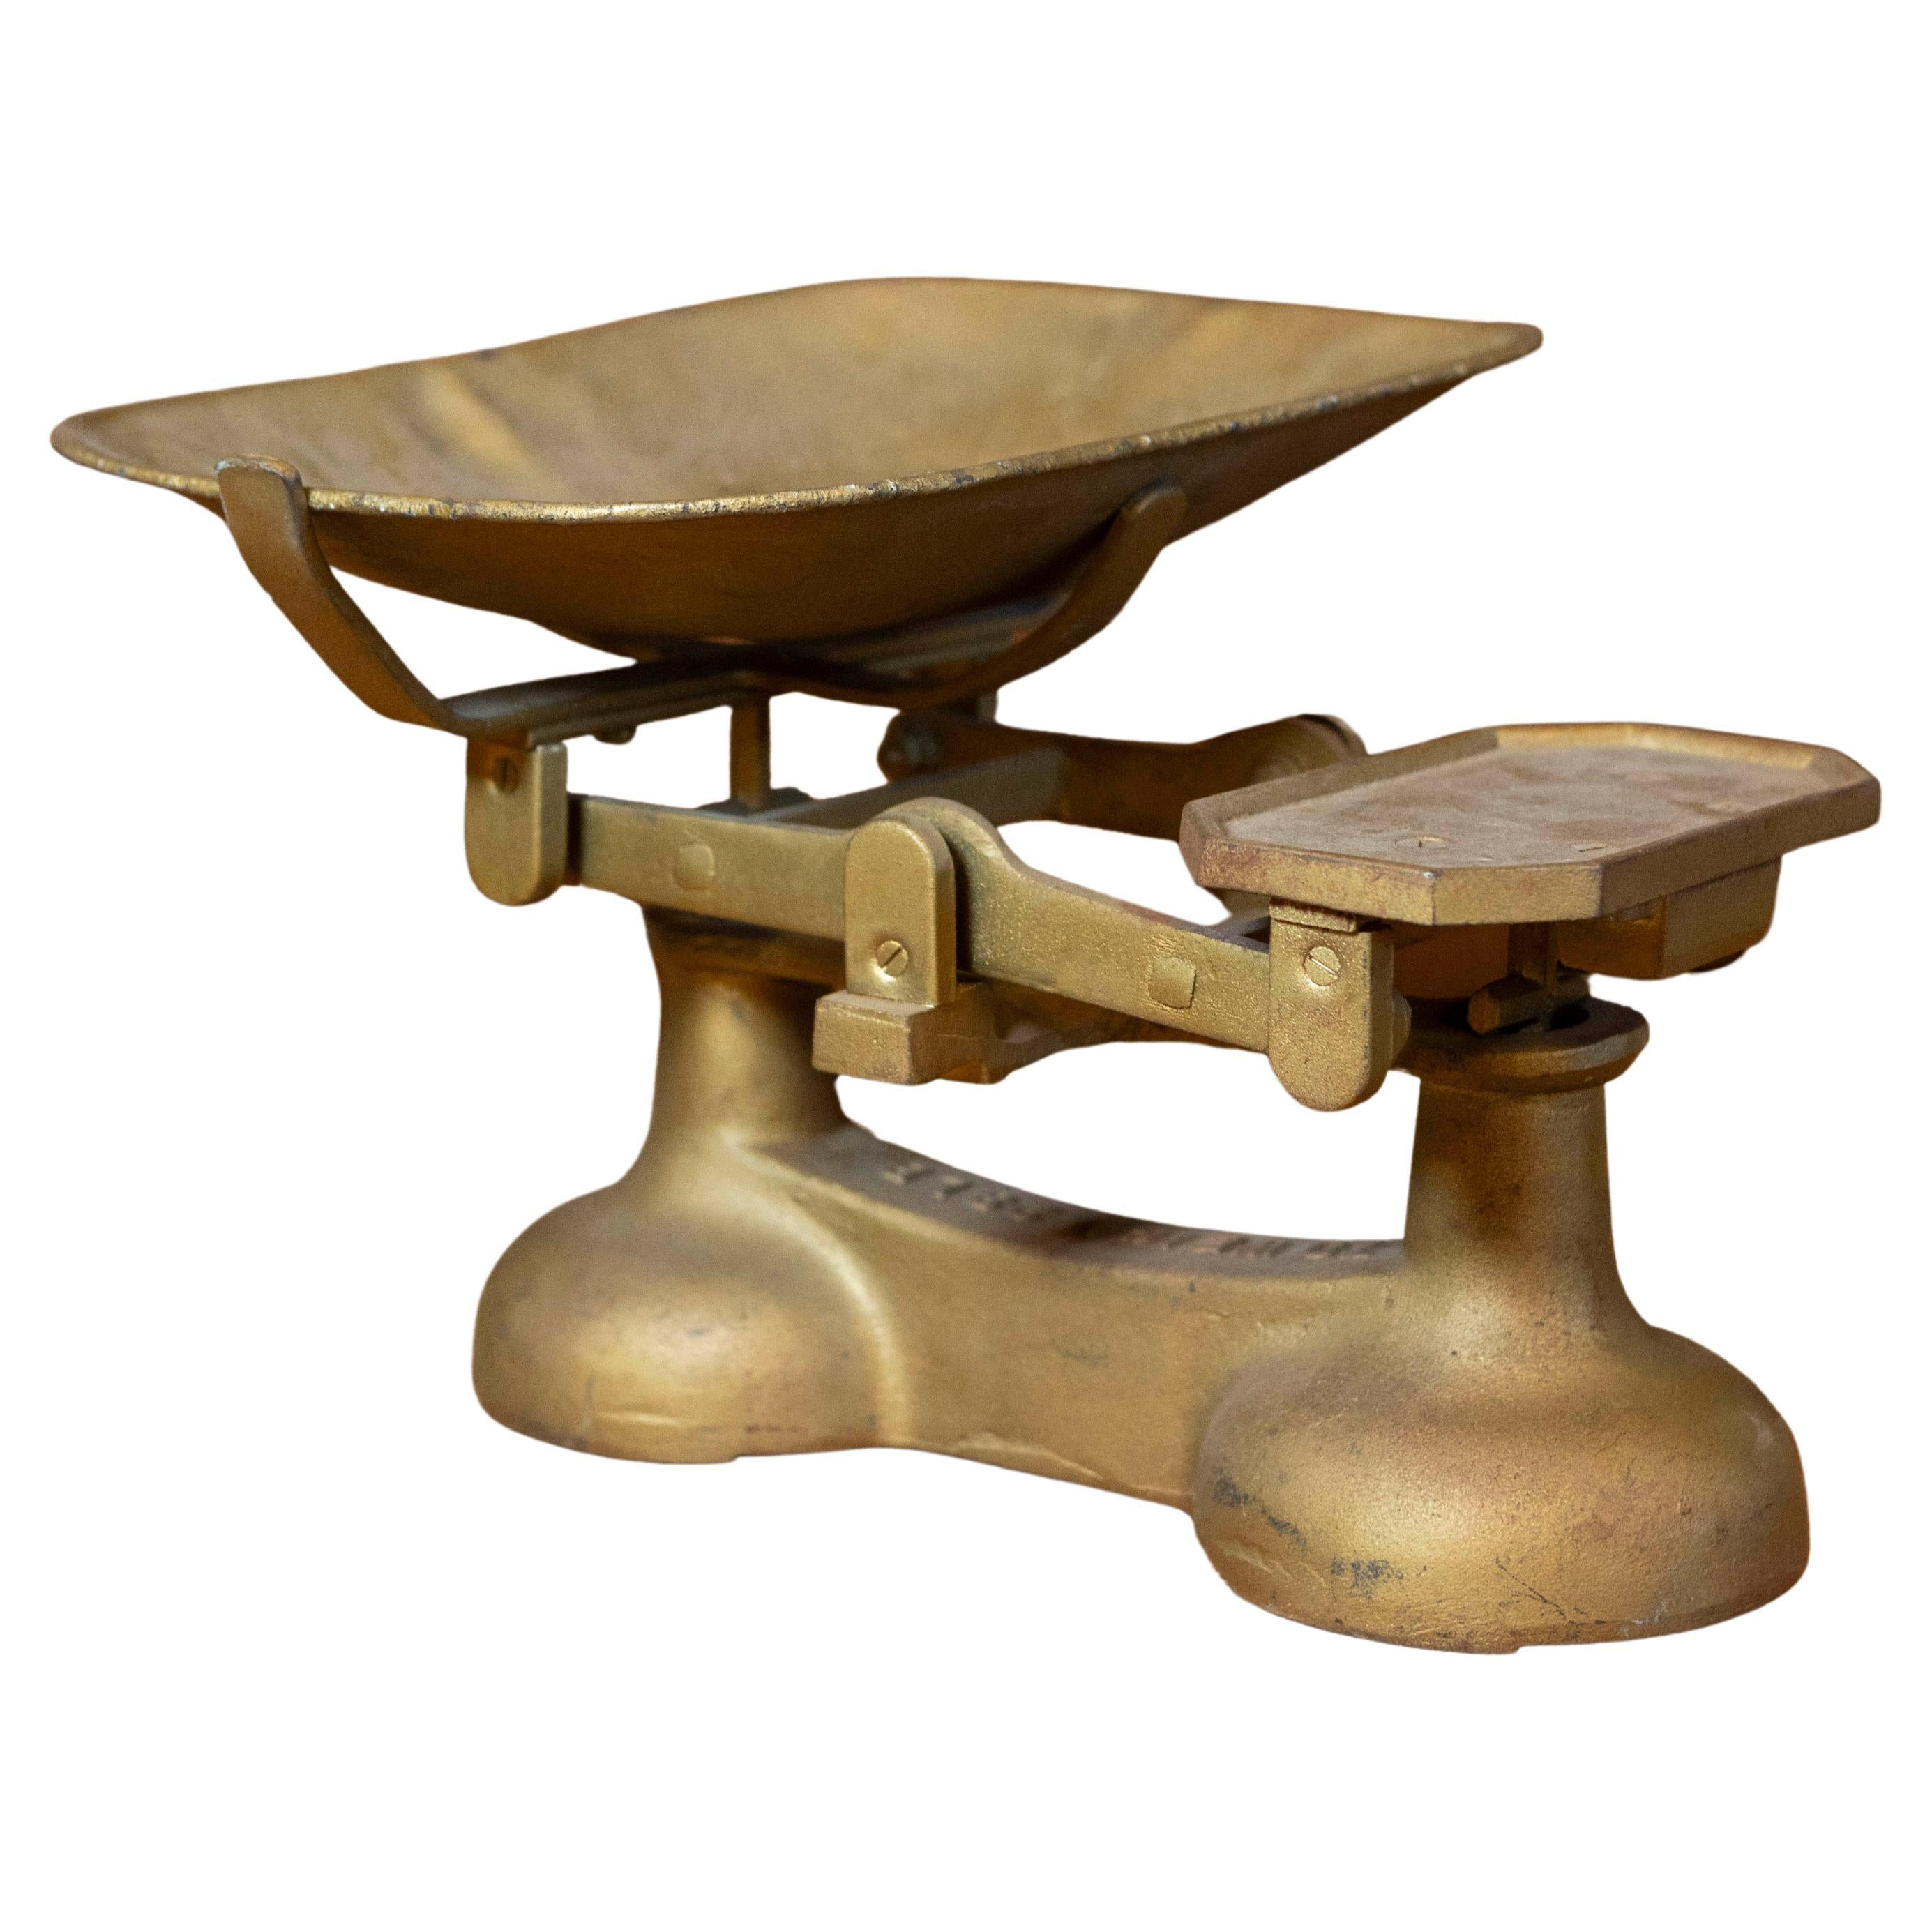 English Brass Scale with Deep Weighing Pan from the 20th Century